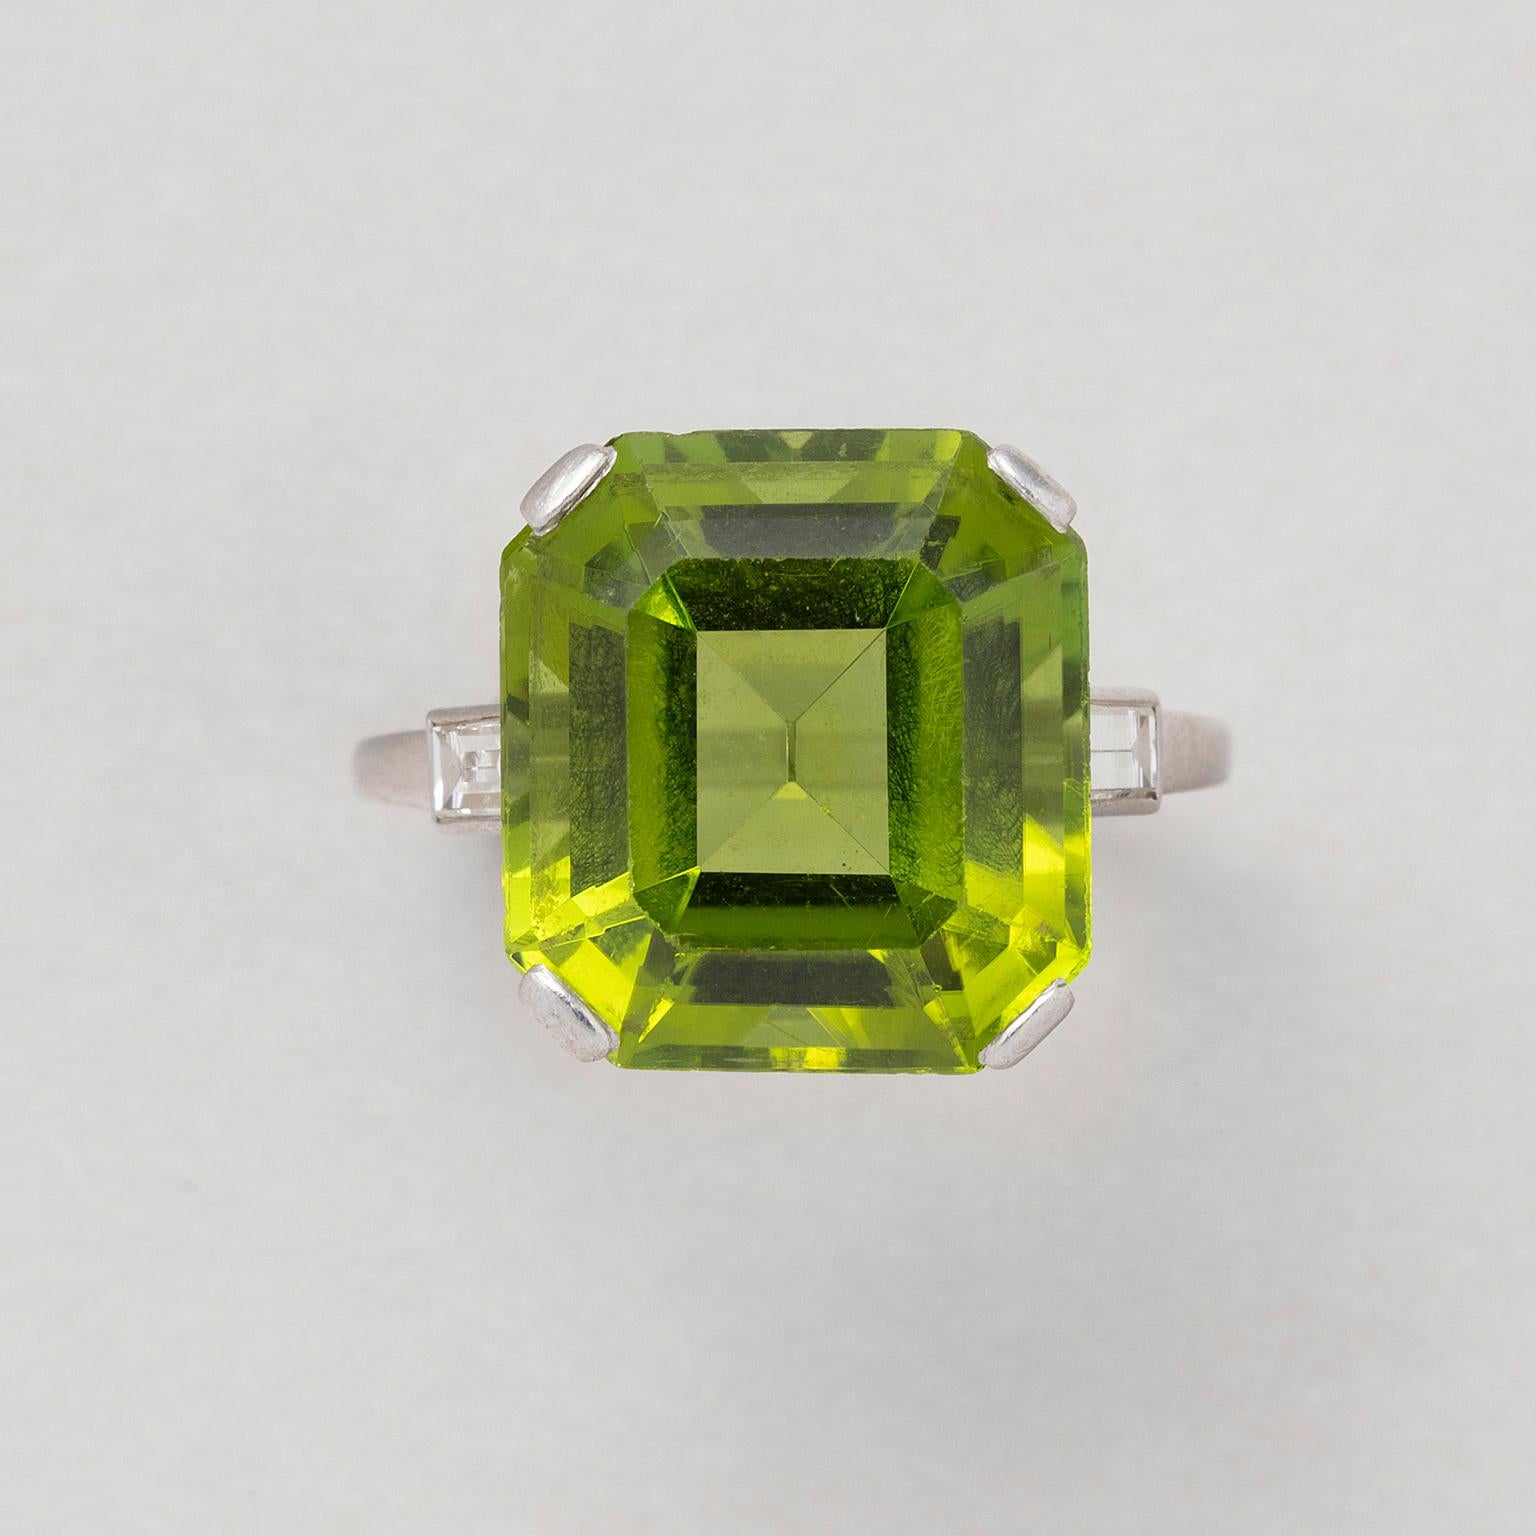 A platinum ring set with a large emerald cut peridot (circa 15 carat) with a small baguette cut diamond on each side, signed and numbered: Cartier, London, 1512.

weight: 6.56 grams
ring size: 17.75 mm / 7 1/2 